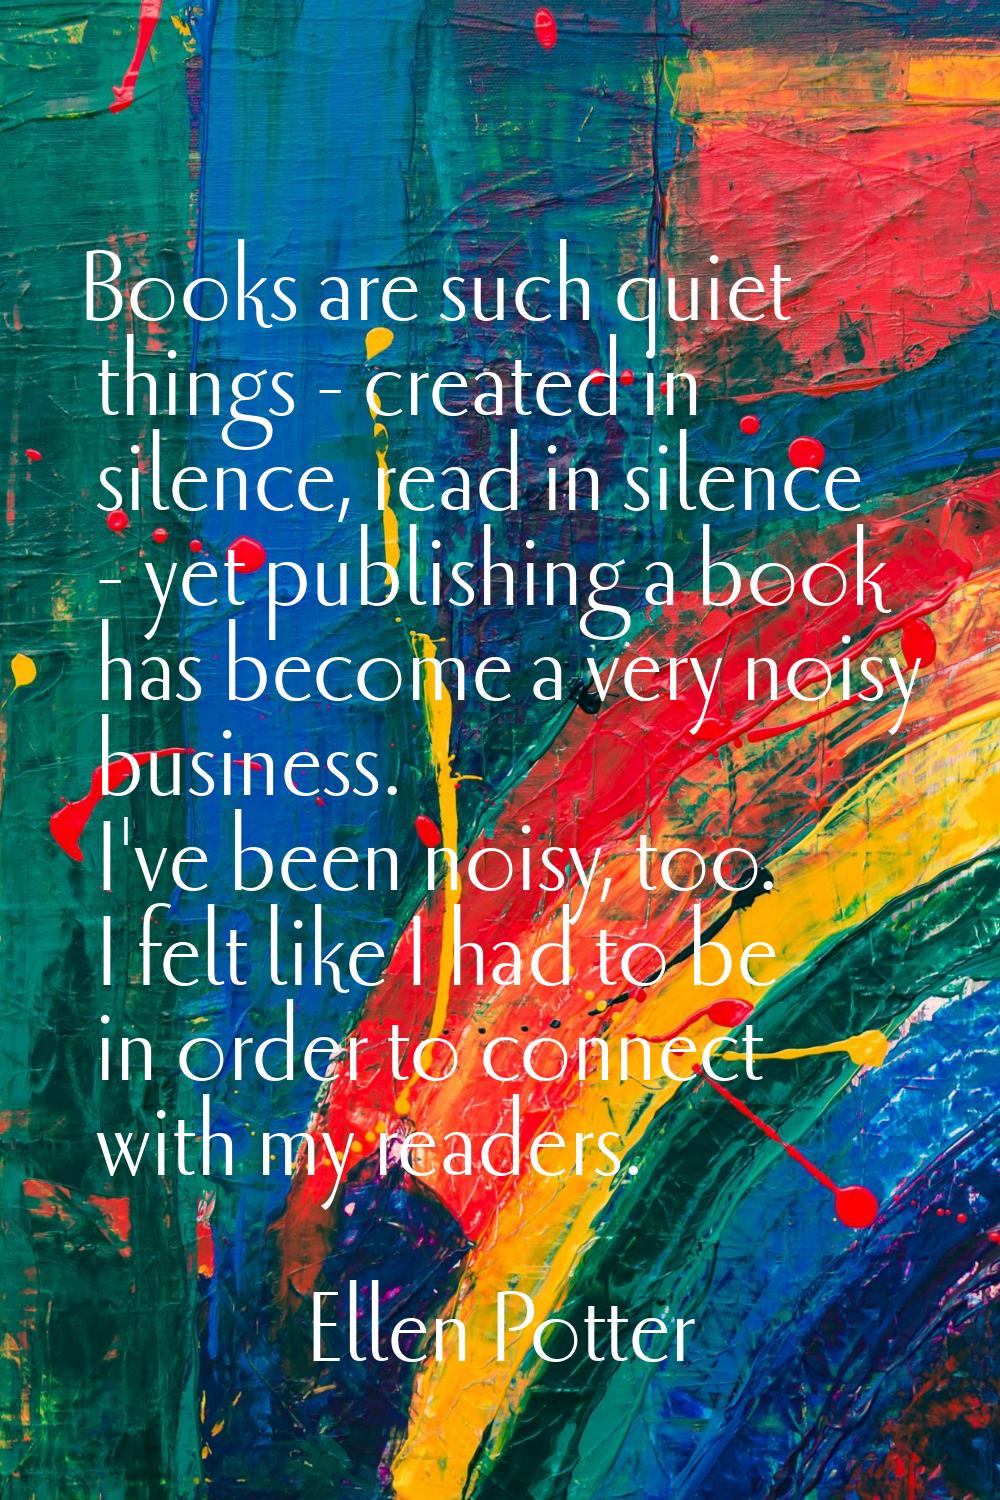 Books are such quiet things - created in silence, read in silence - yet publishing a book has becom